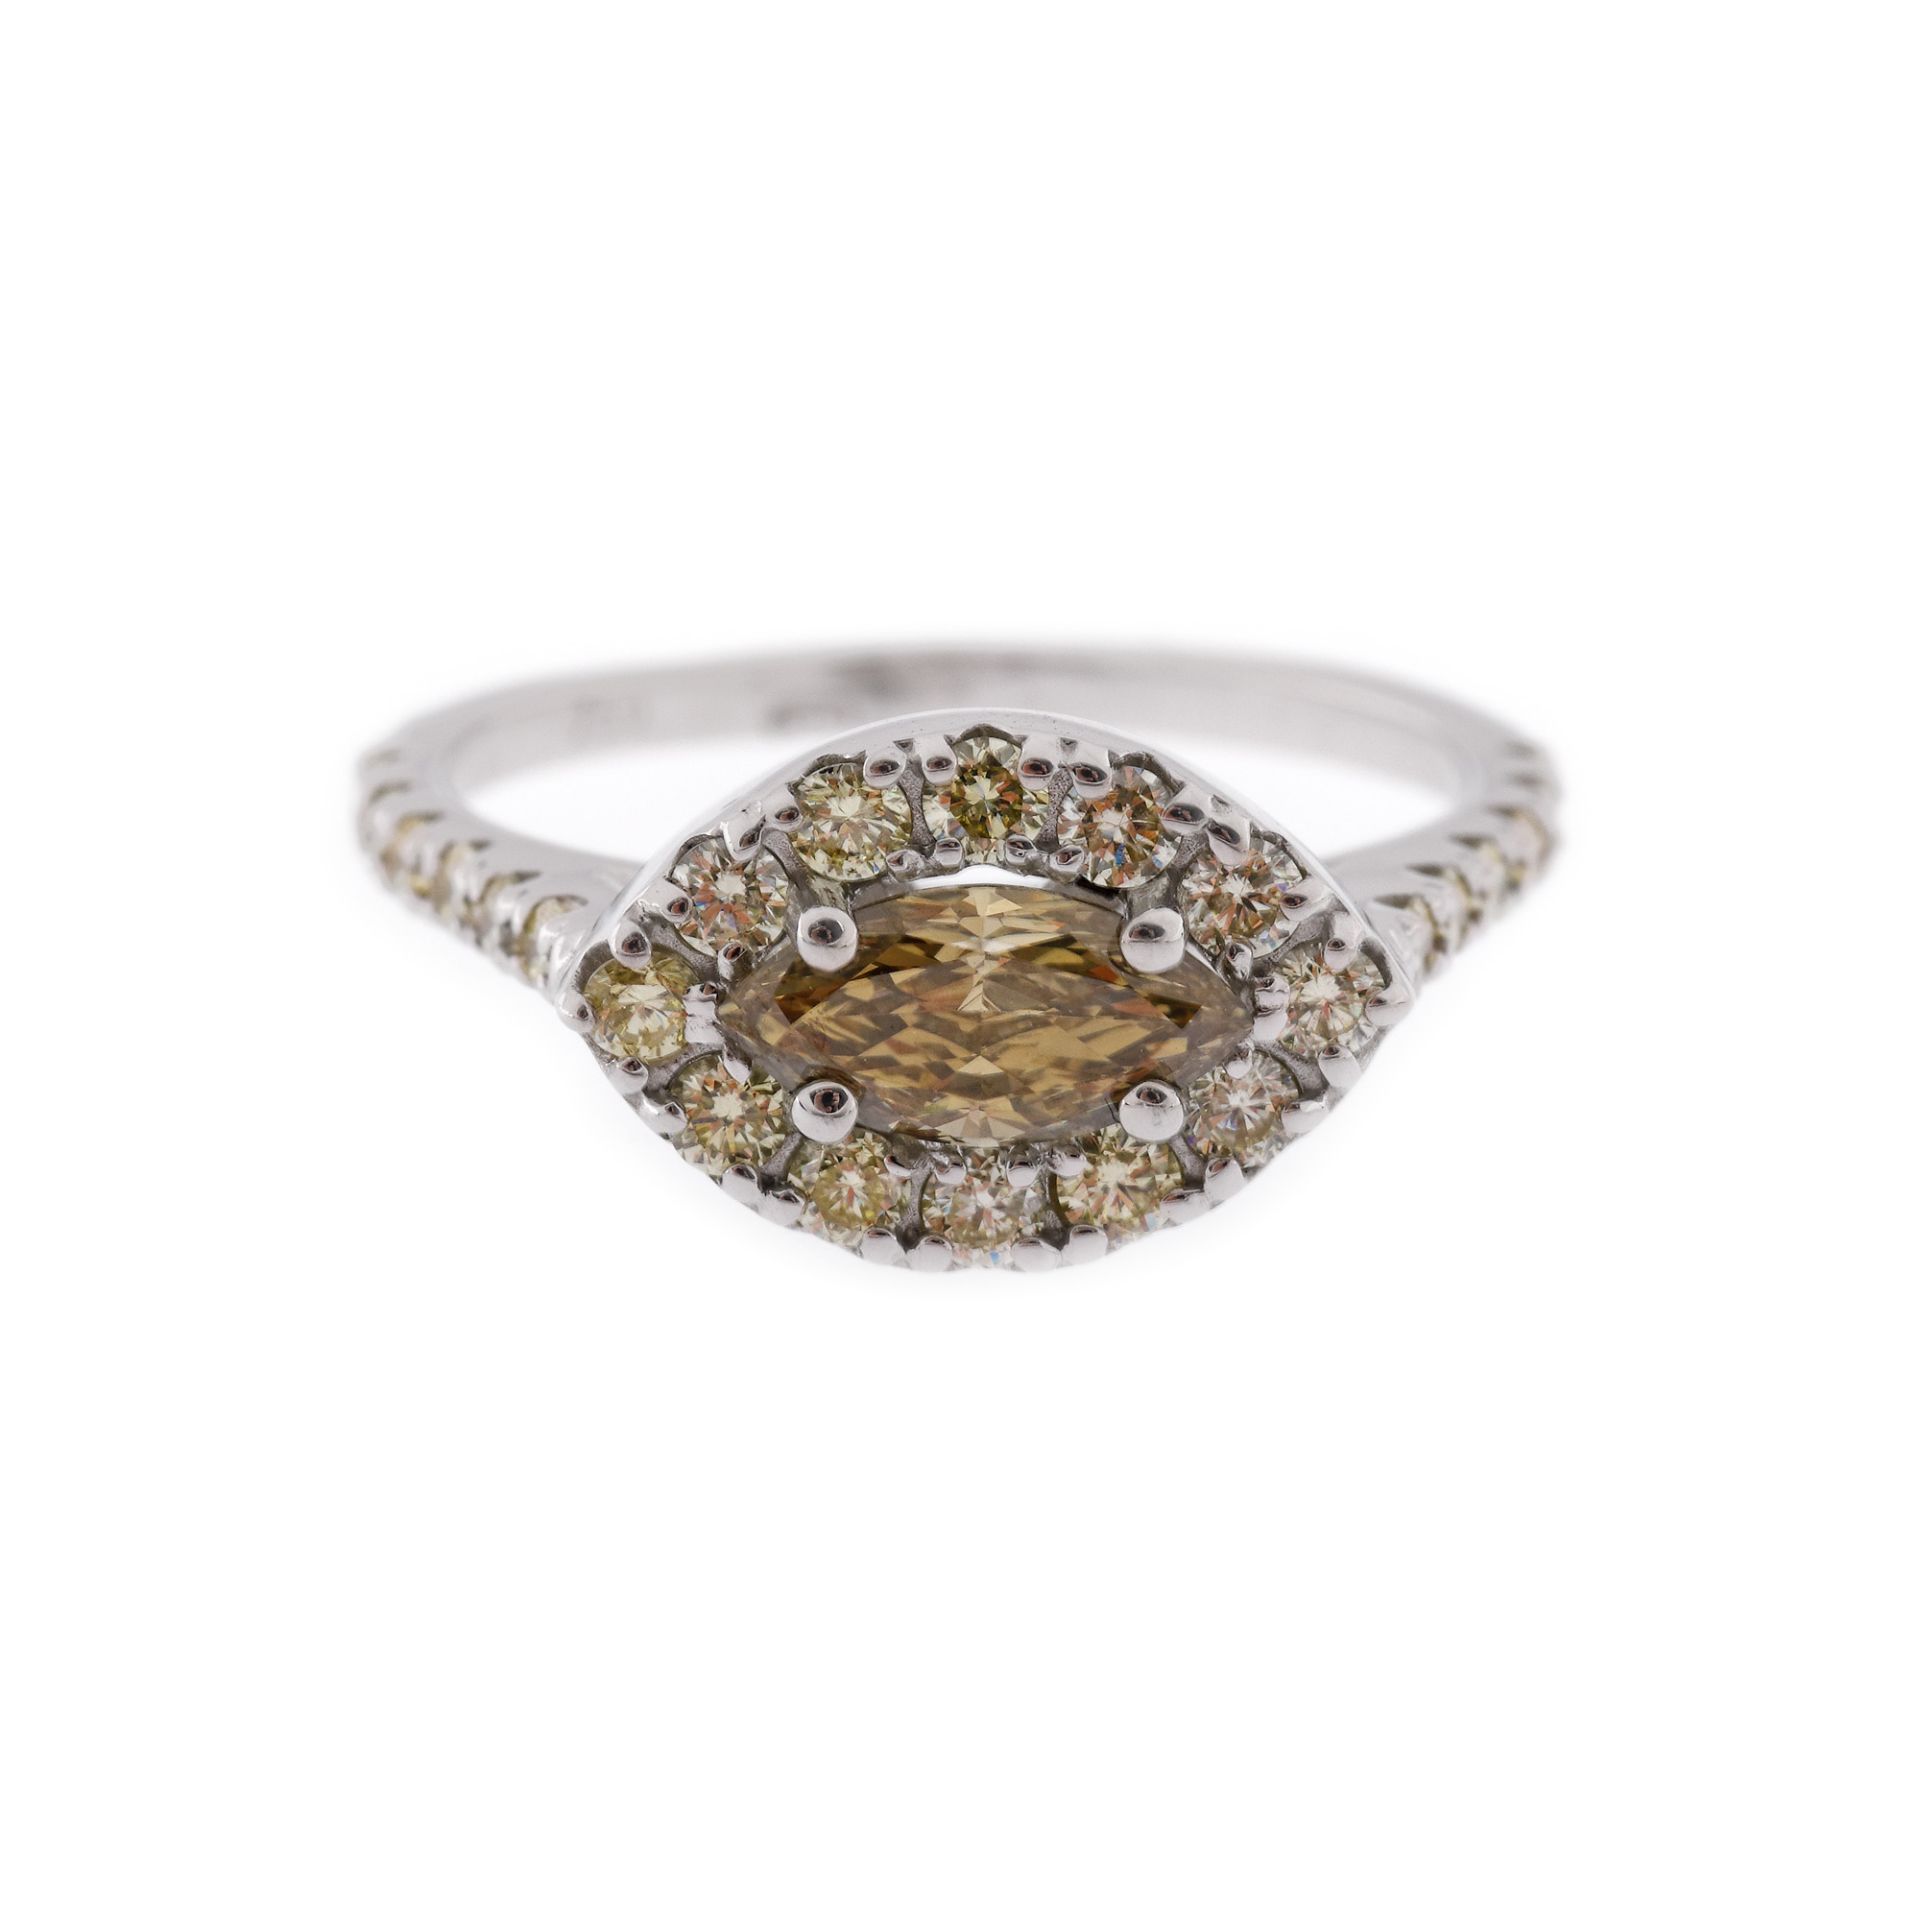 White gold ring, centrally adorned with yellowish-green marquise diamond and yellow diamonds